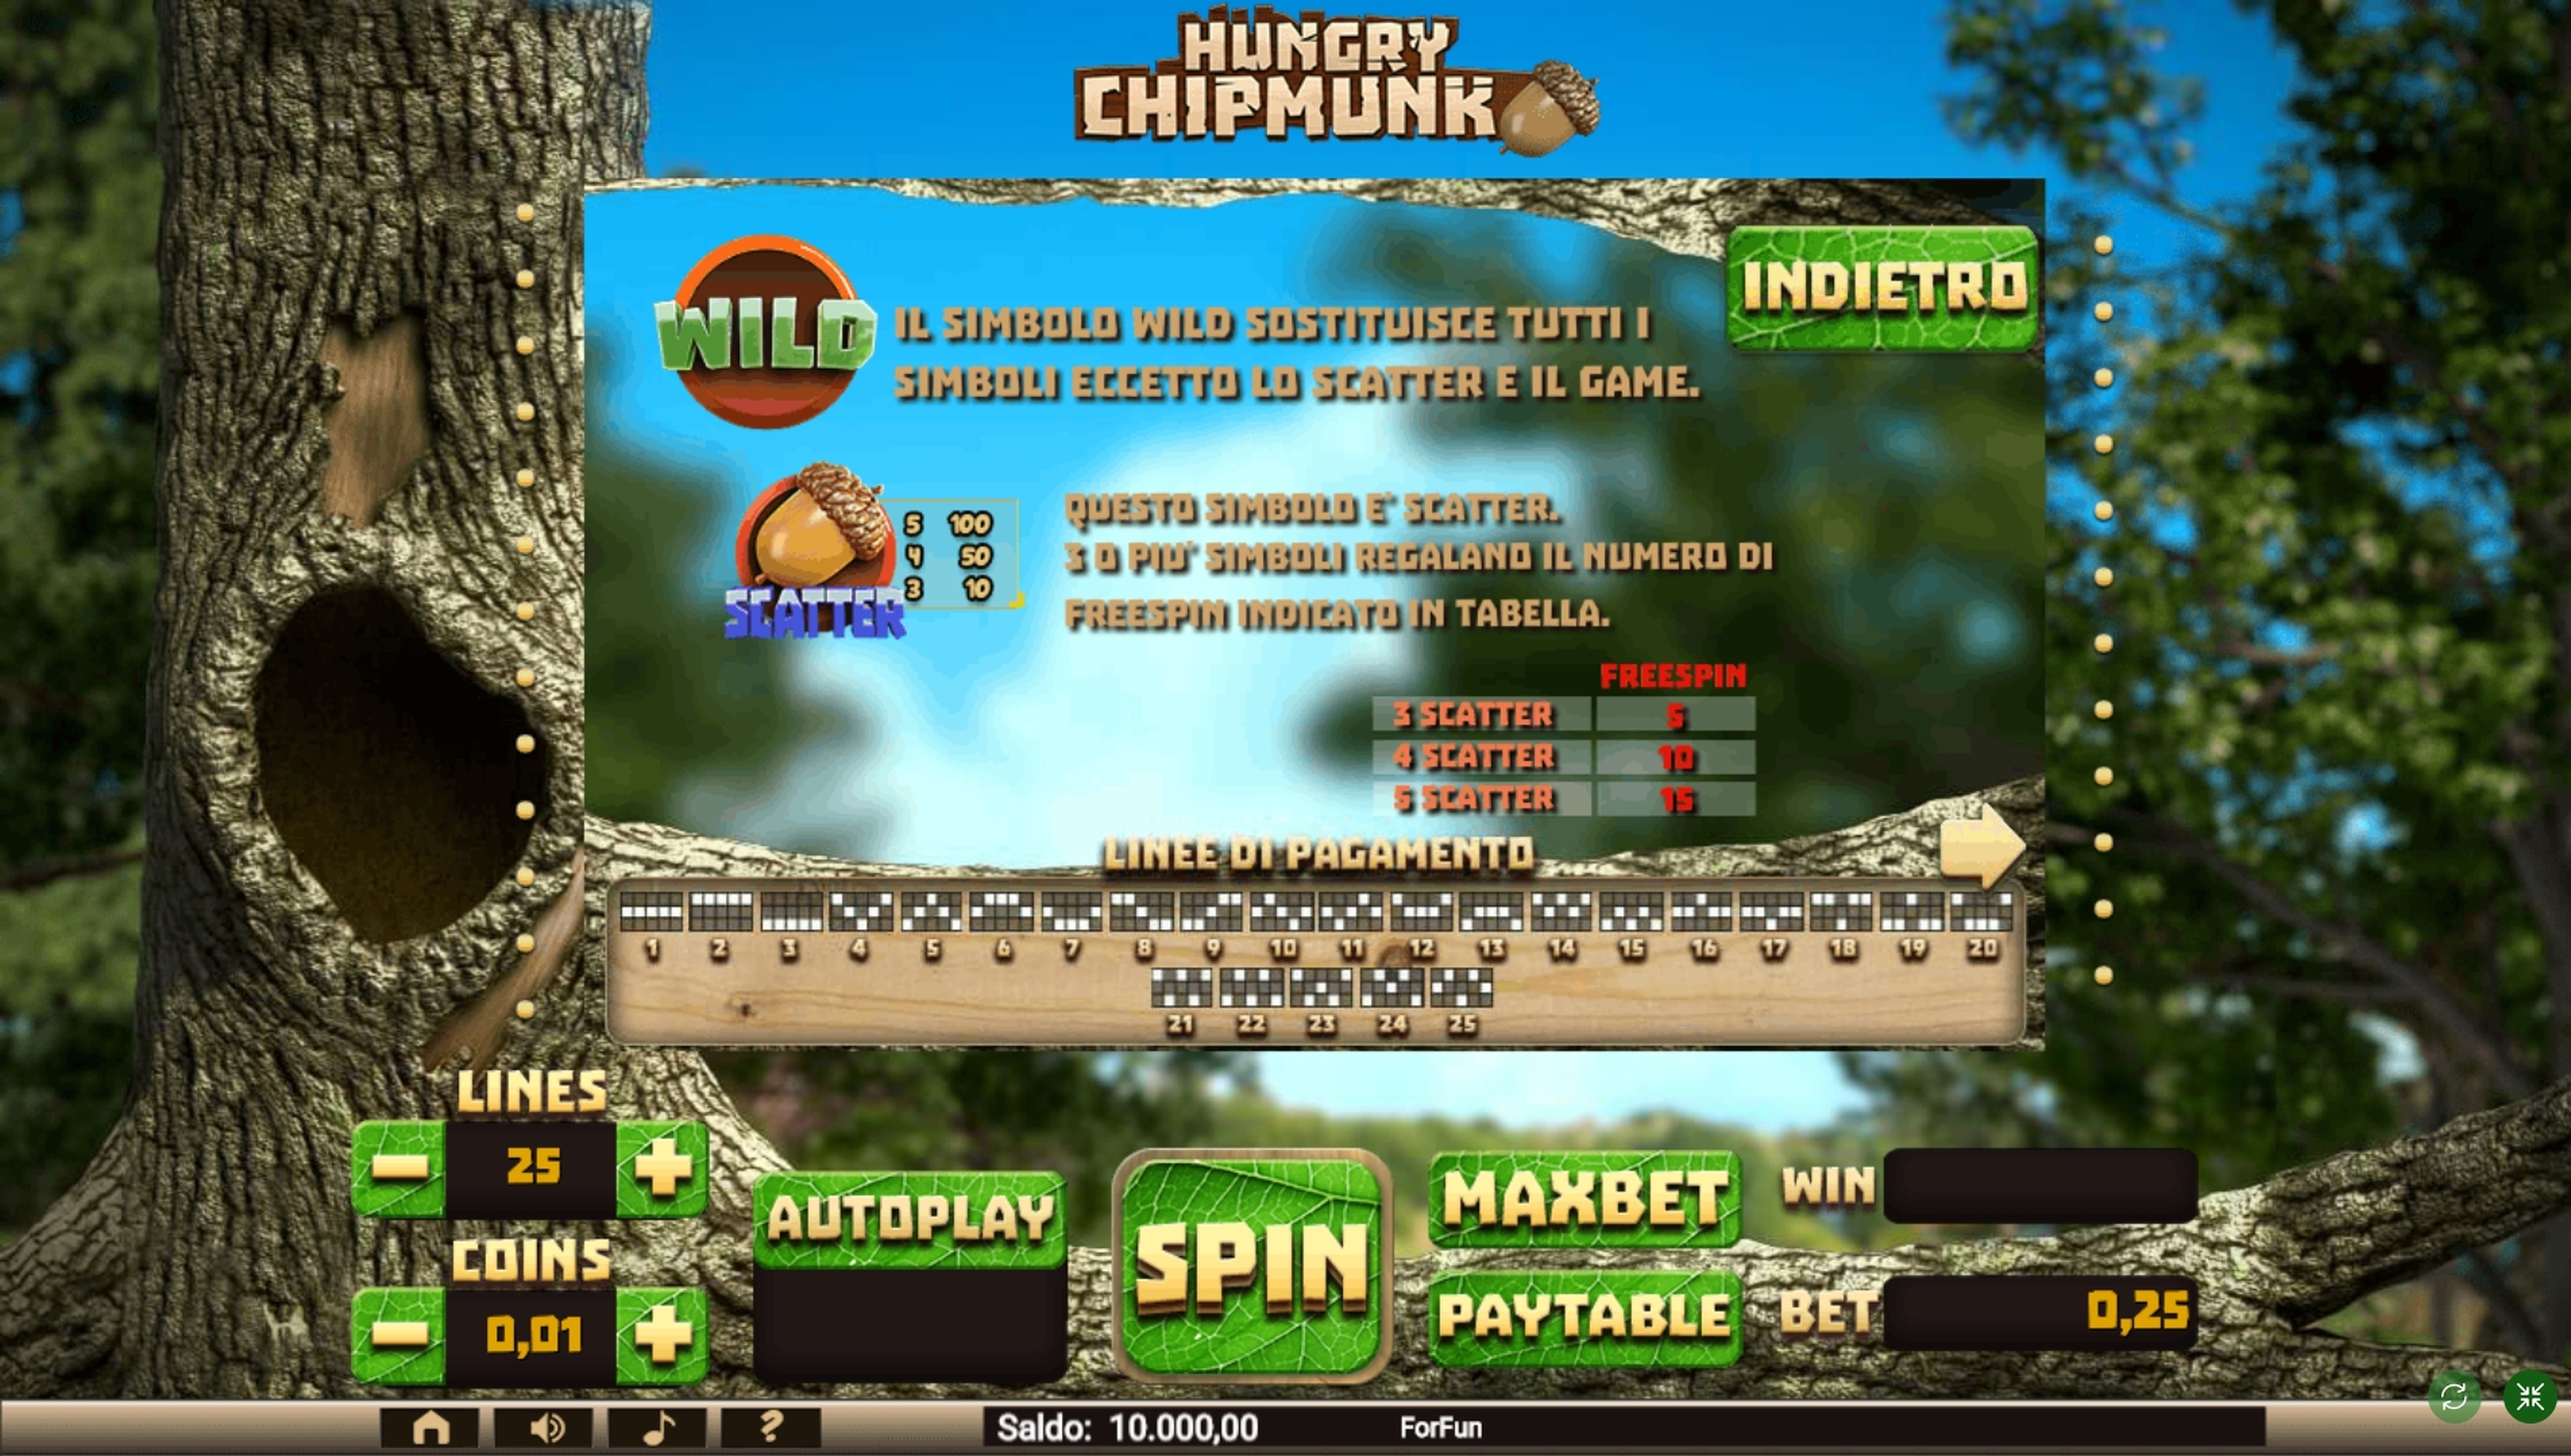 Info of Hungry Chipmunk Slot Game by Tuko Productions